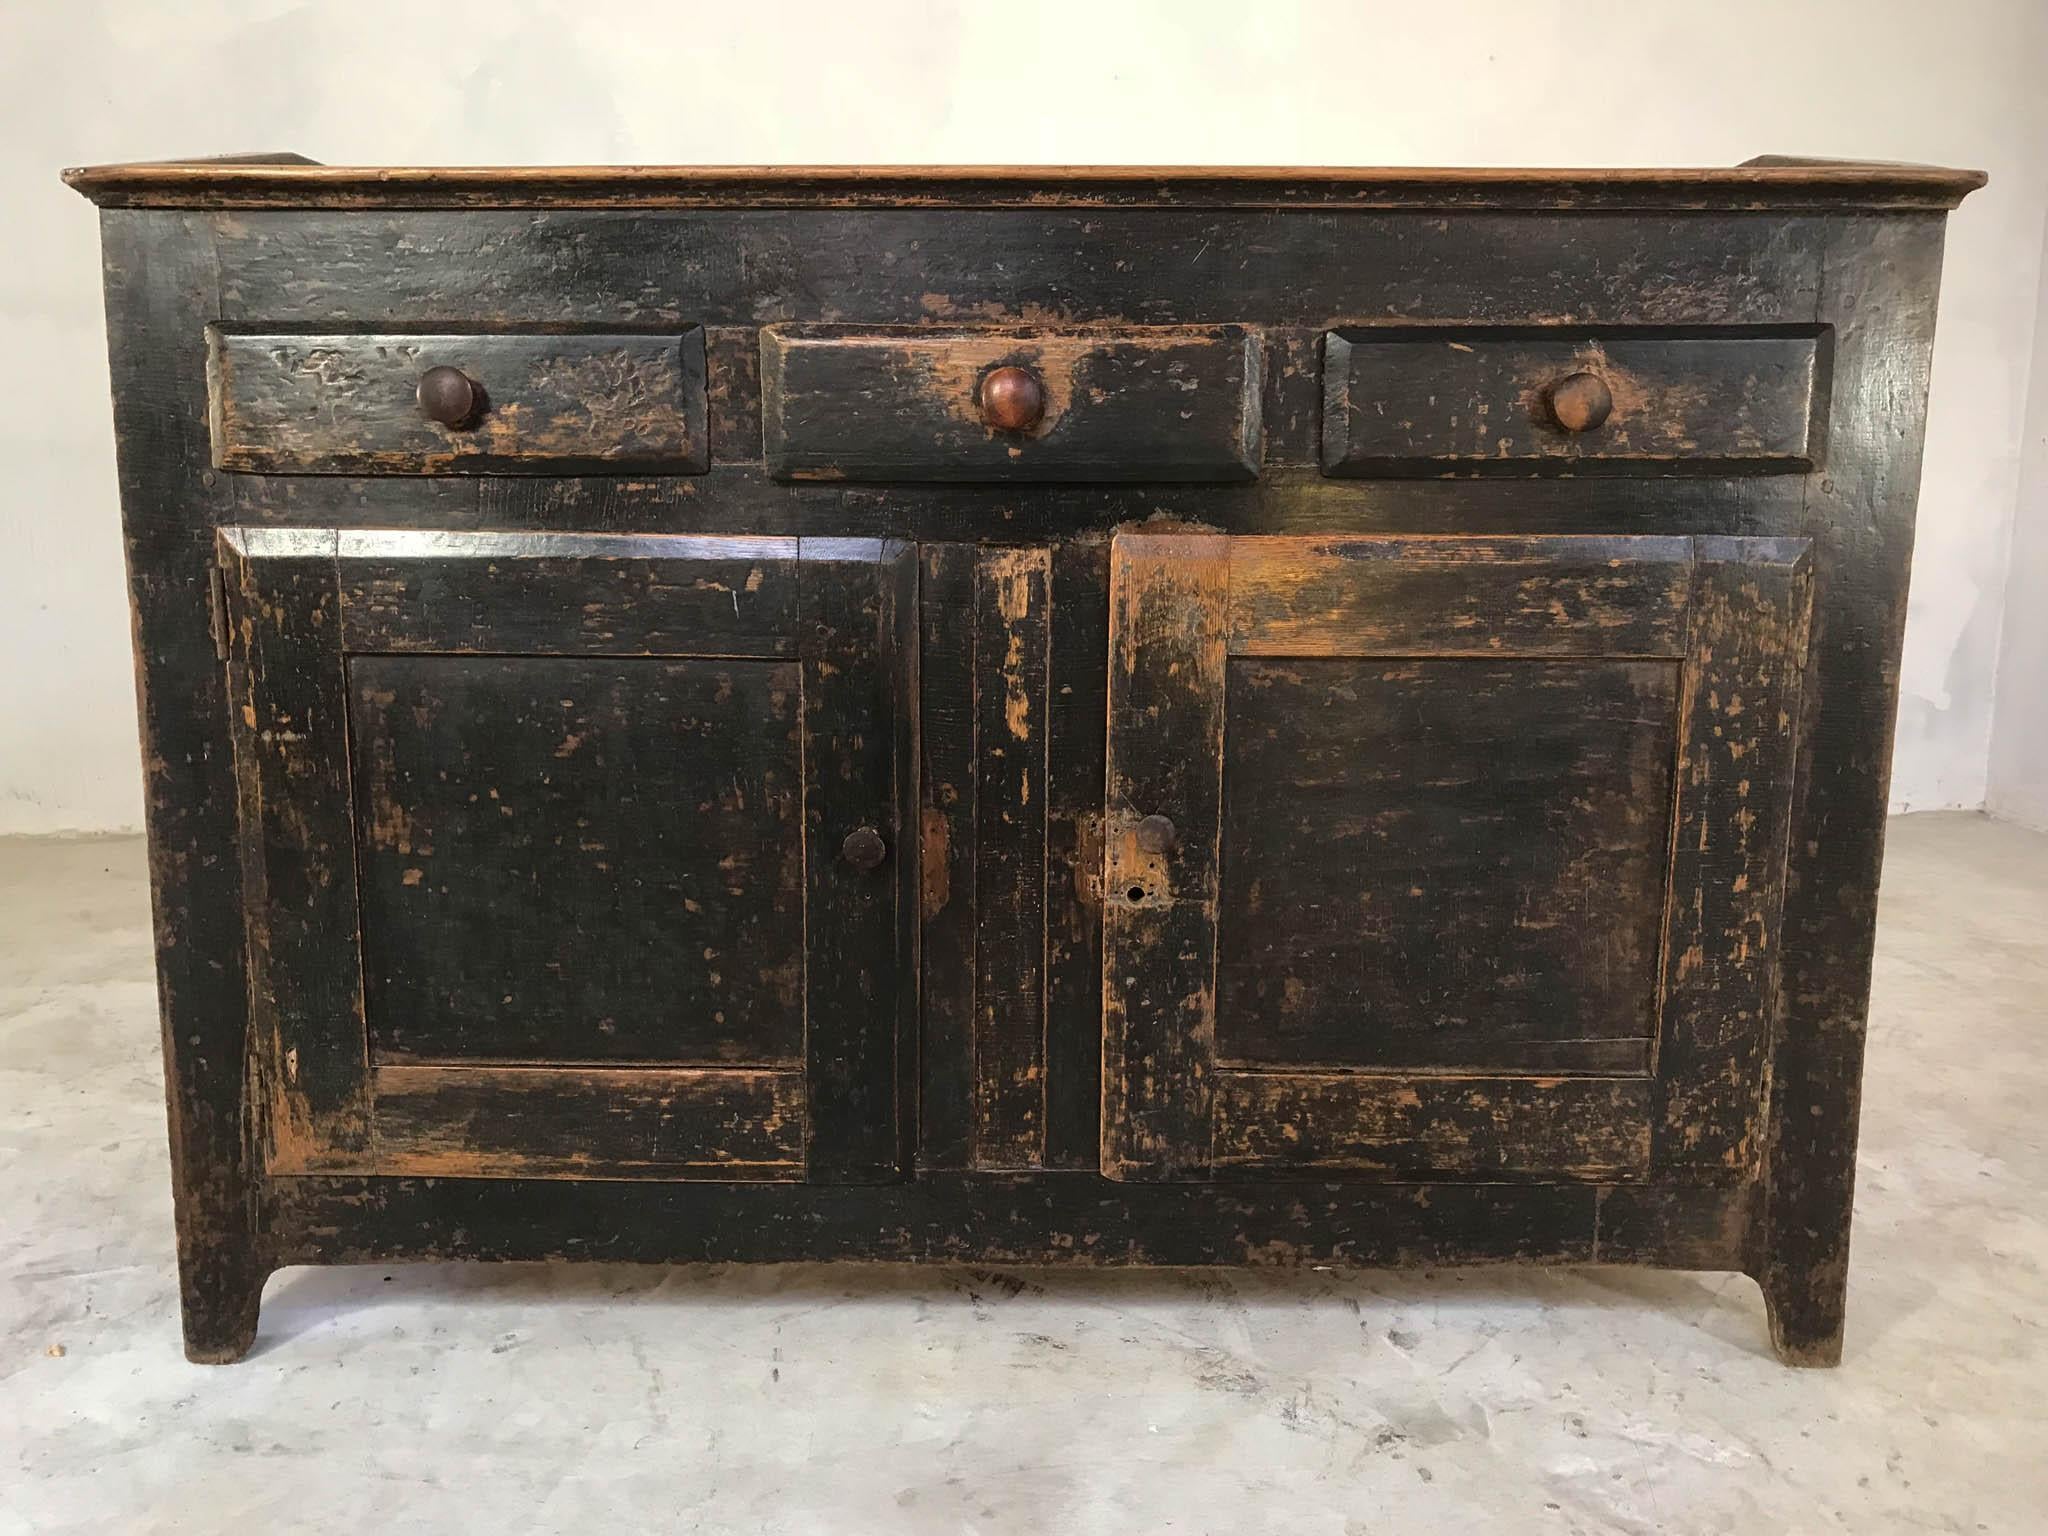 A very rare English sideboard or cupboard with a deep storage area on top, dating from the 1880s. Unusually, it has been made from oak and features jointed panels, later but very old paint that is almost black, original backboards, three drawers and